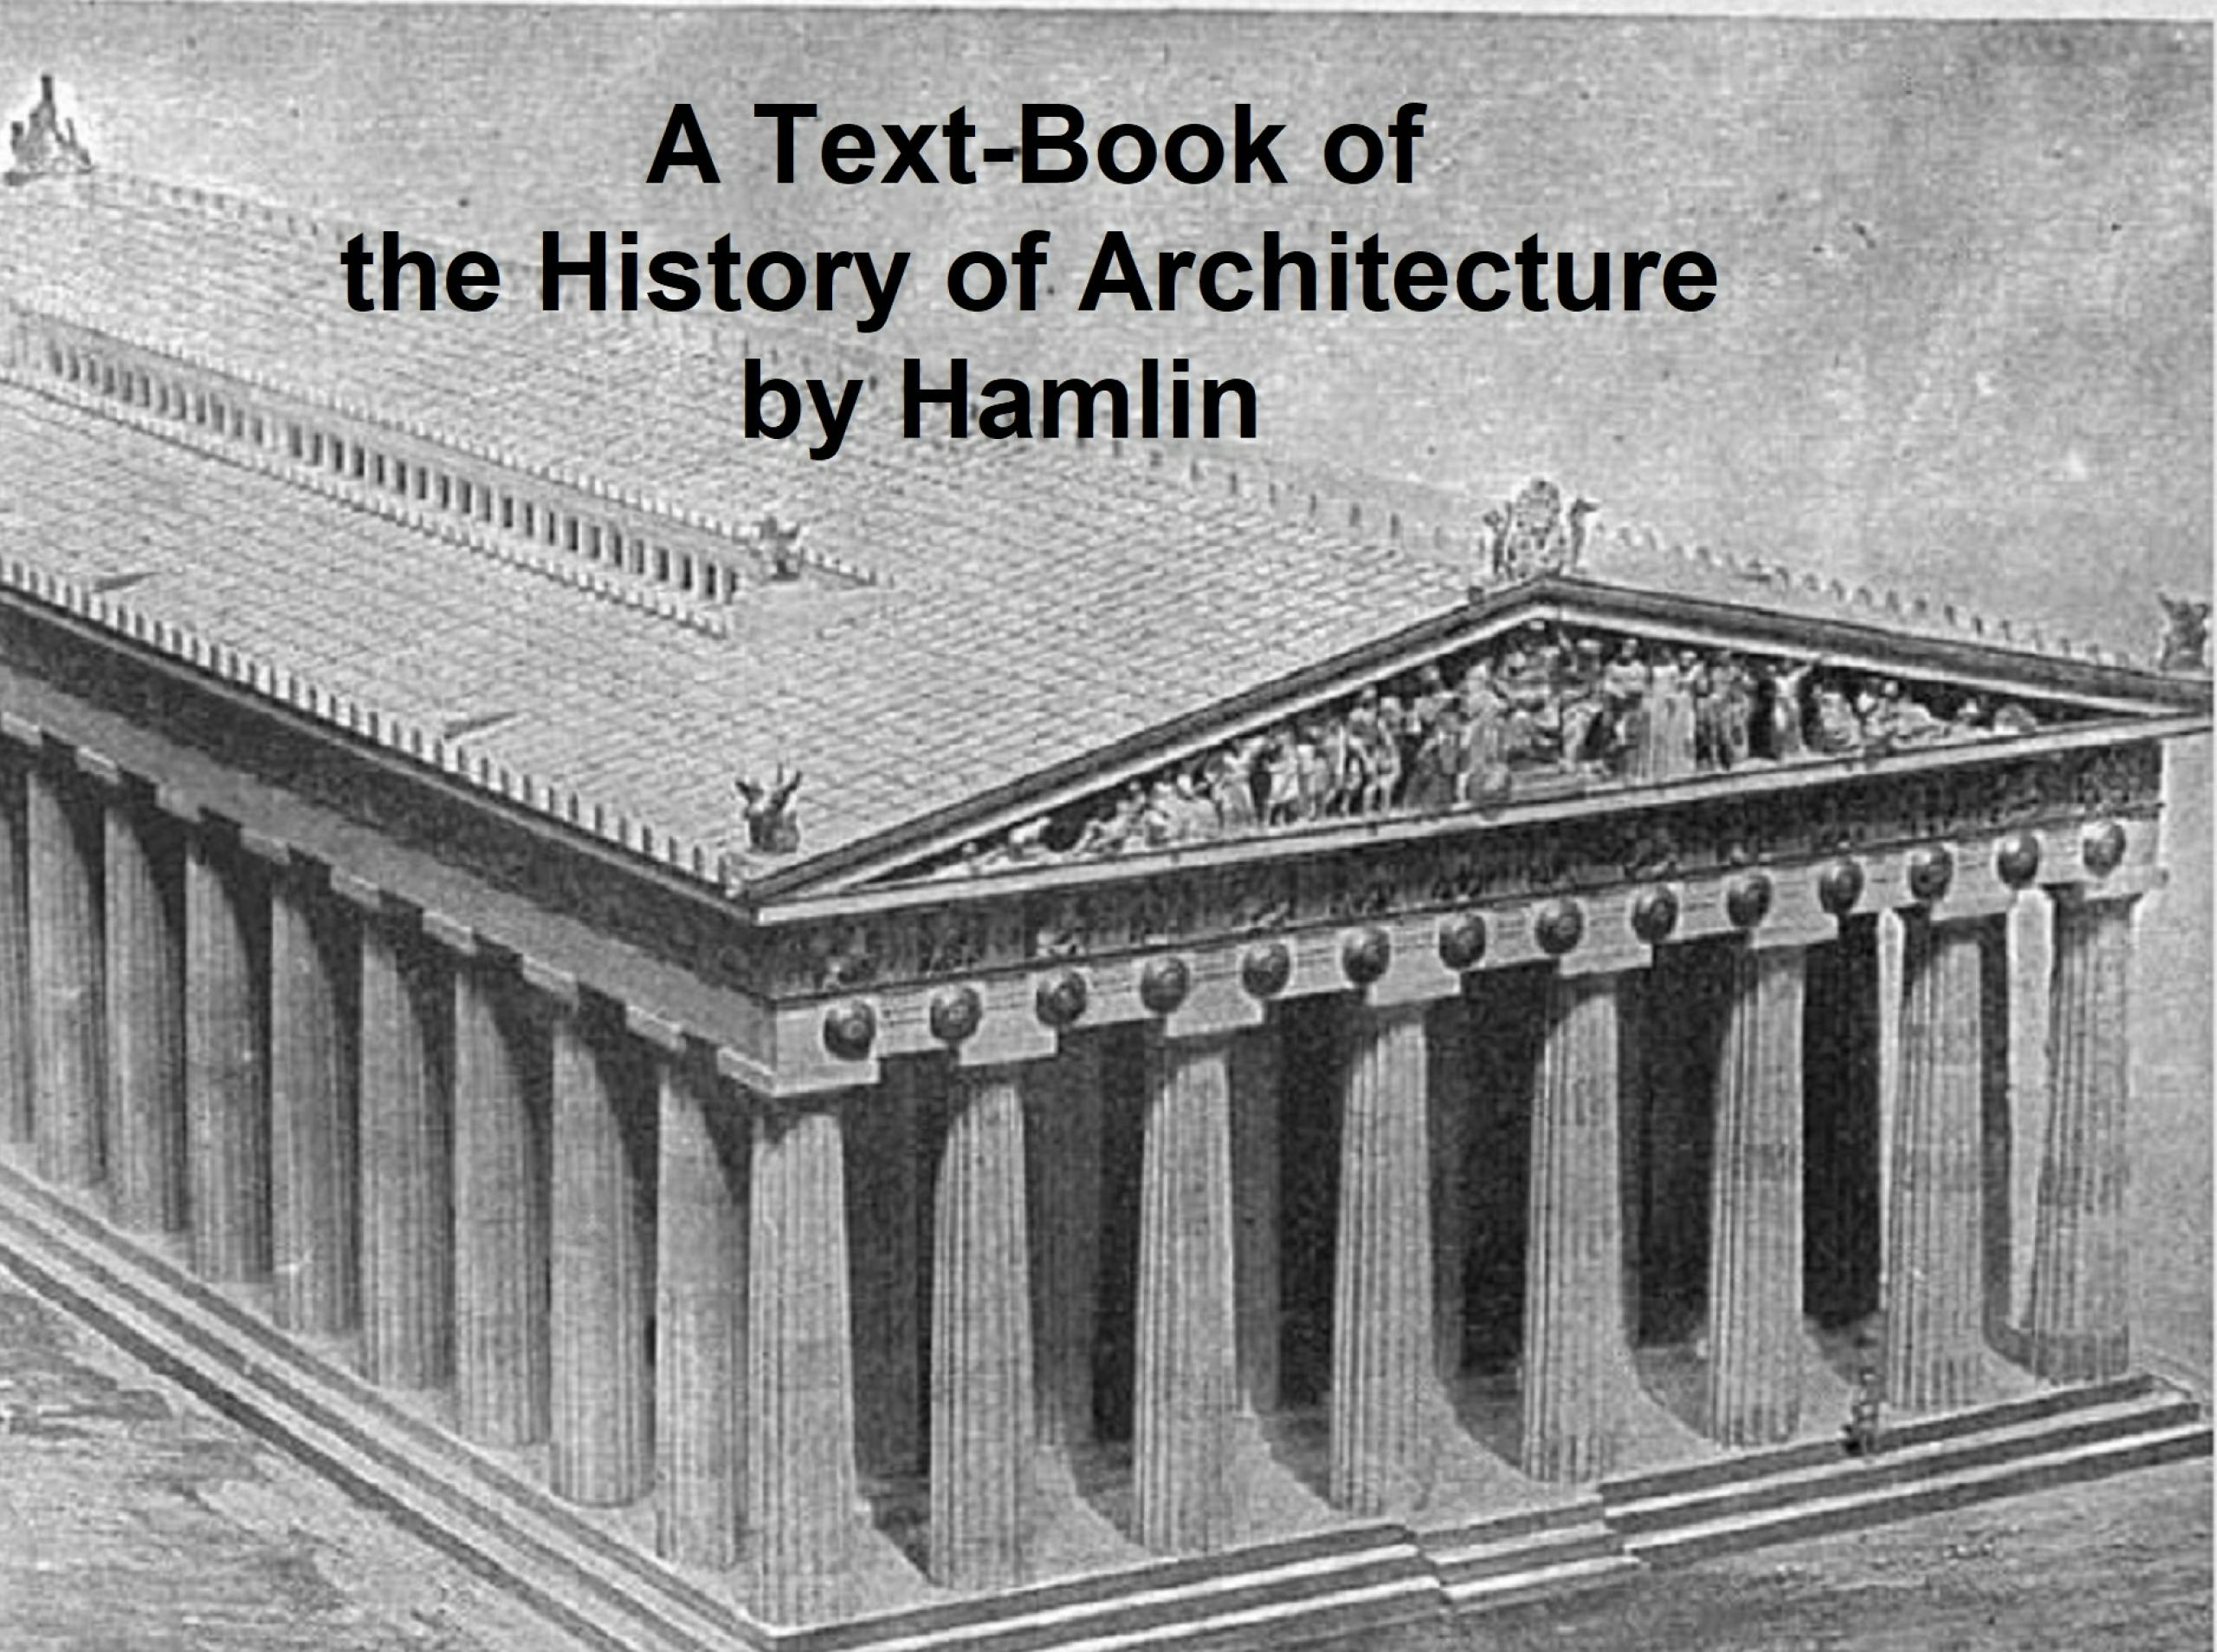 A Text-Book of the History of Architecture - A. D. F. Hamlin